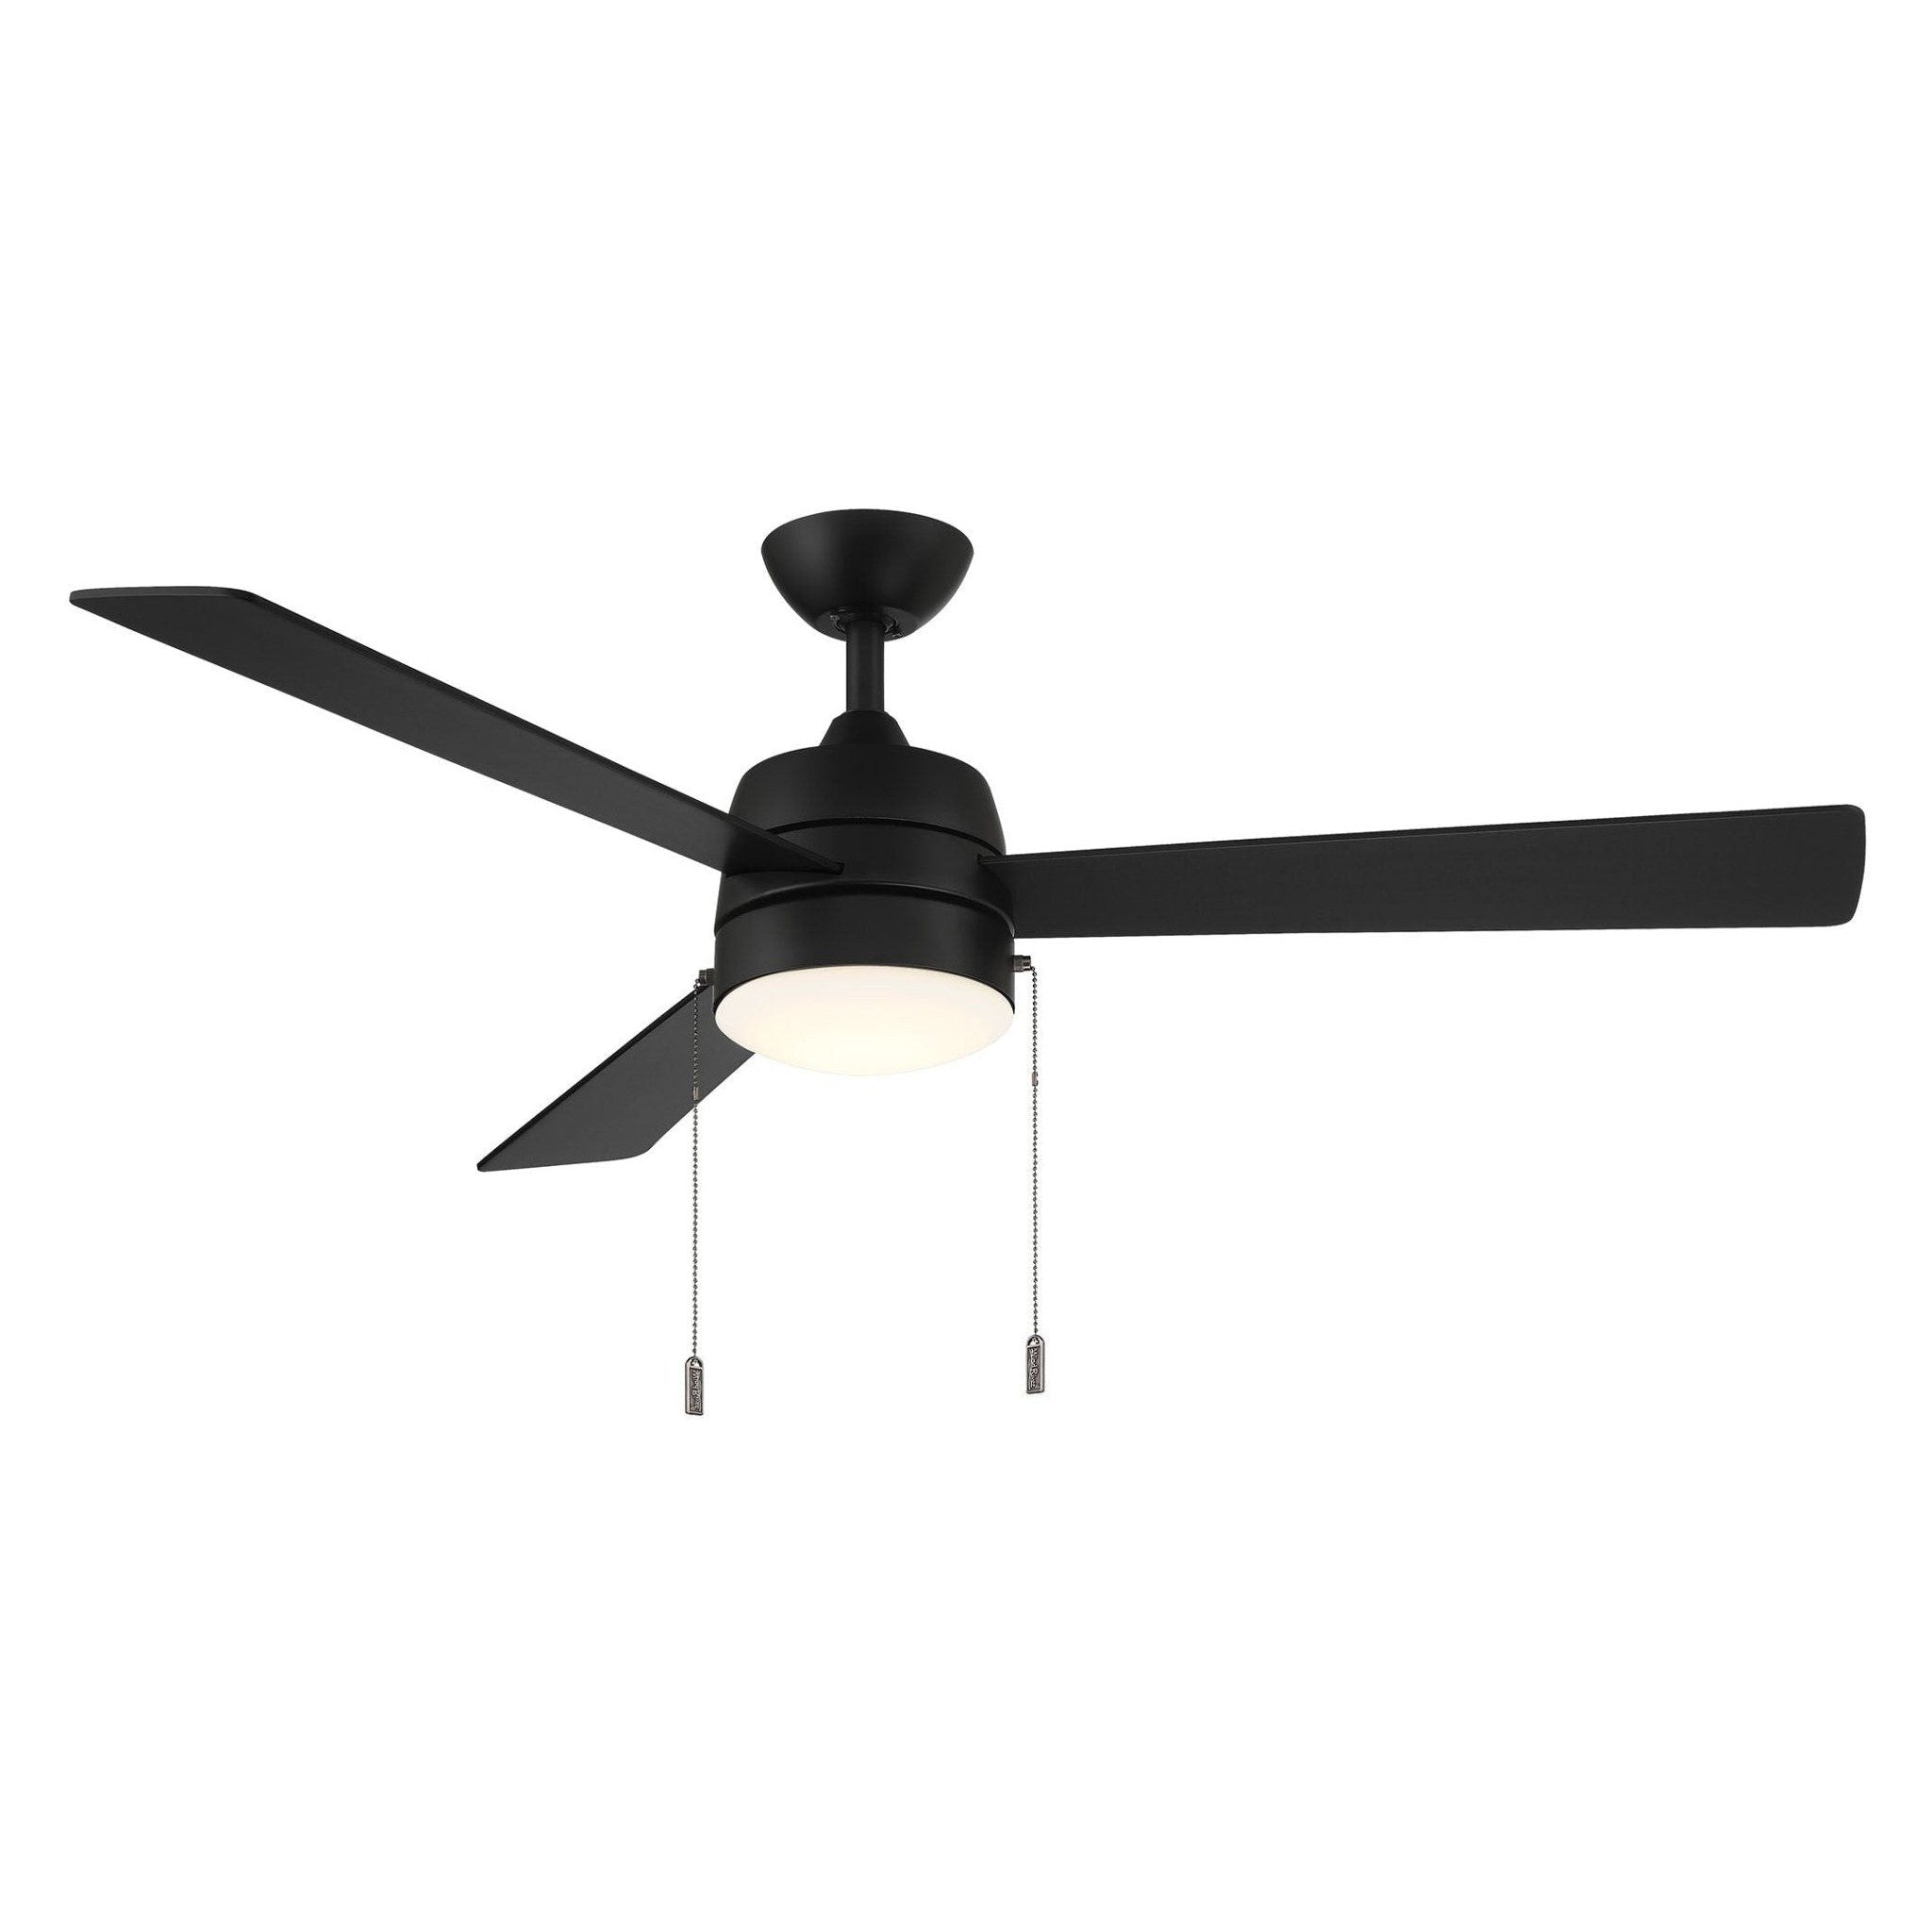 Wind River Nolan 52" 3 Blade Pull Chain LED Ceiling Fan - Image 1